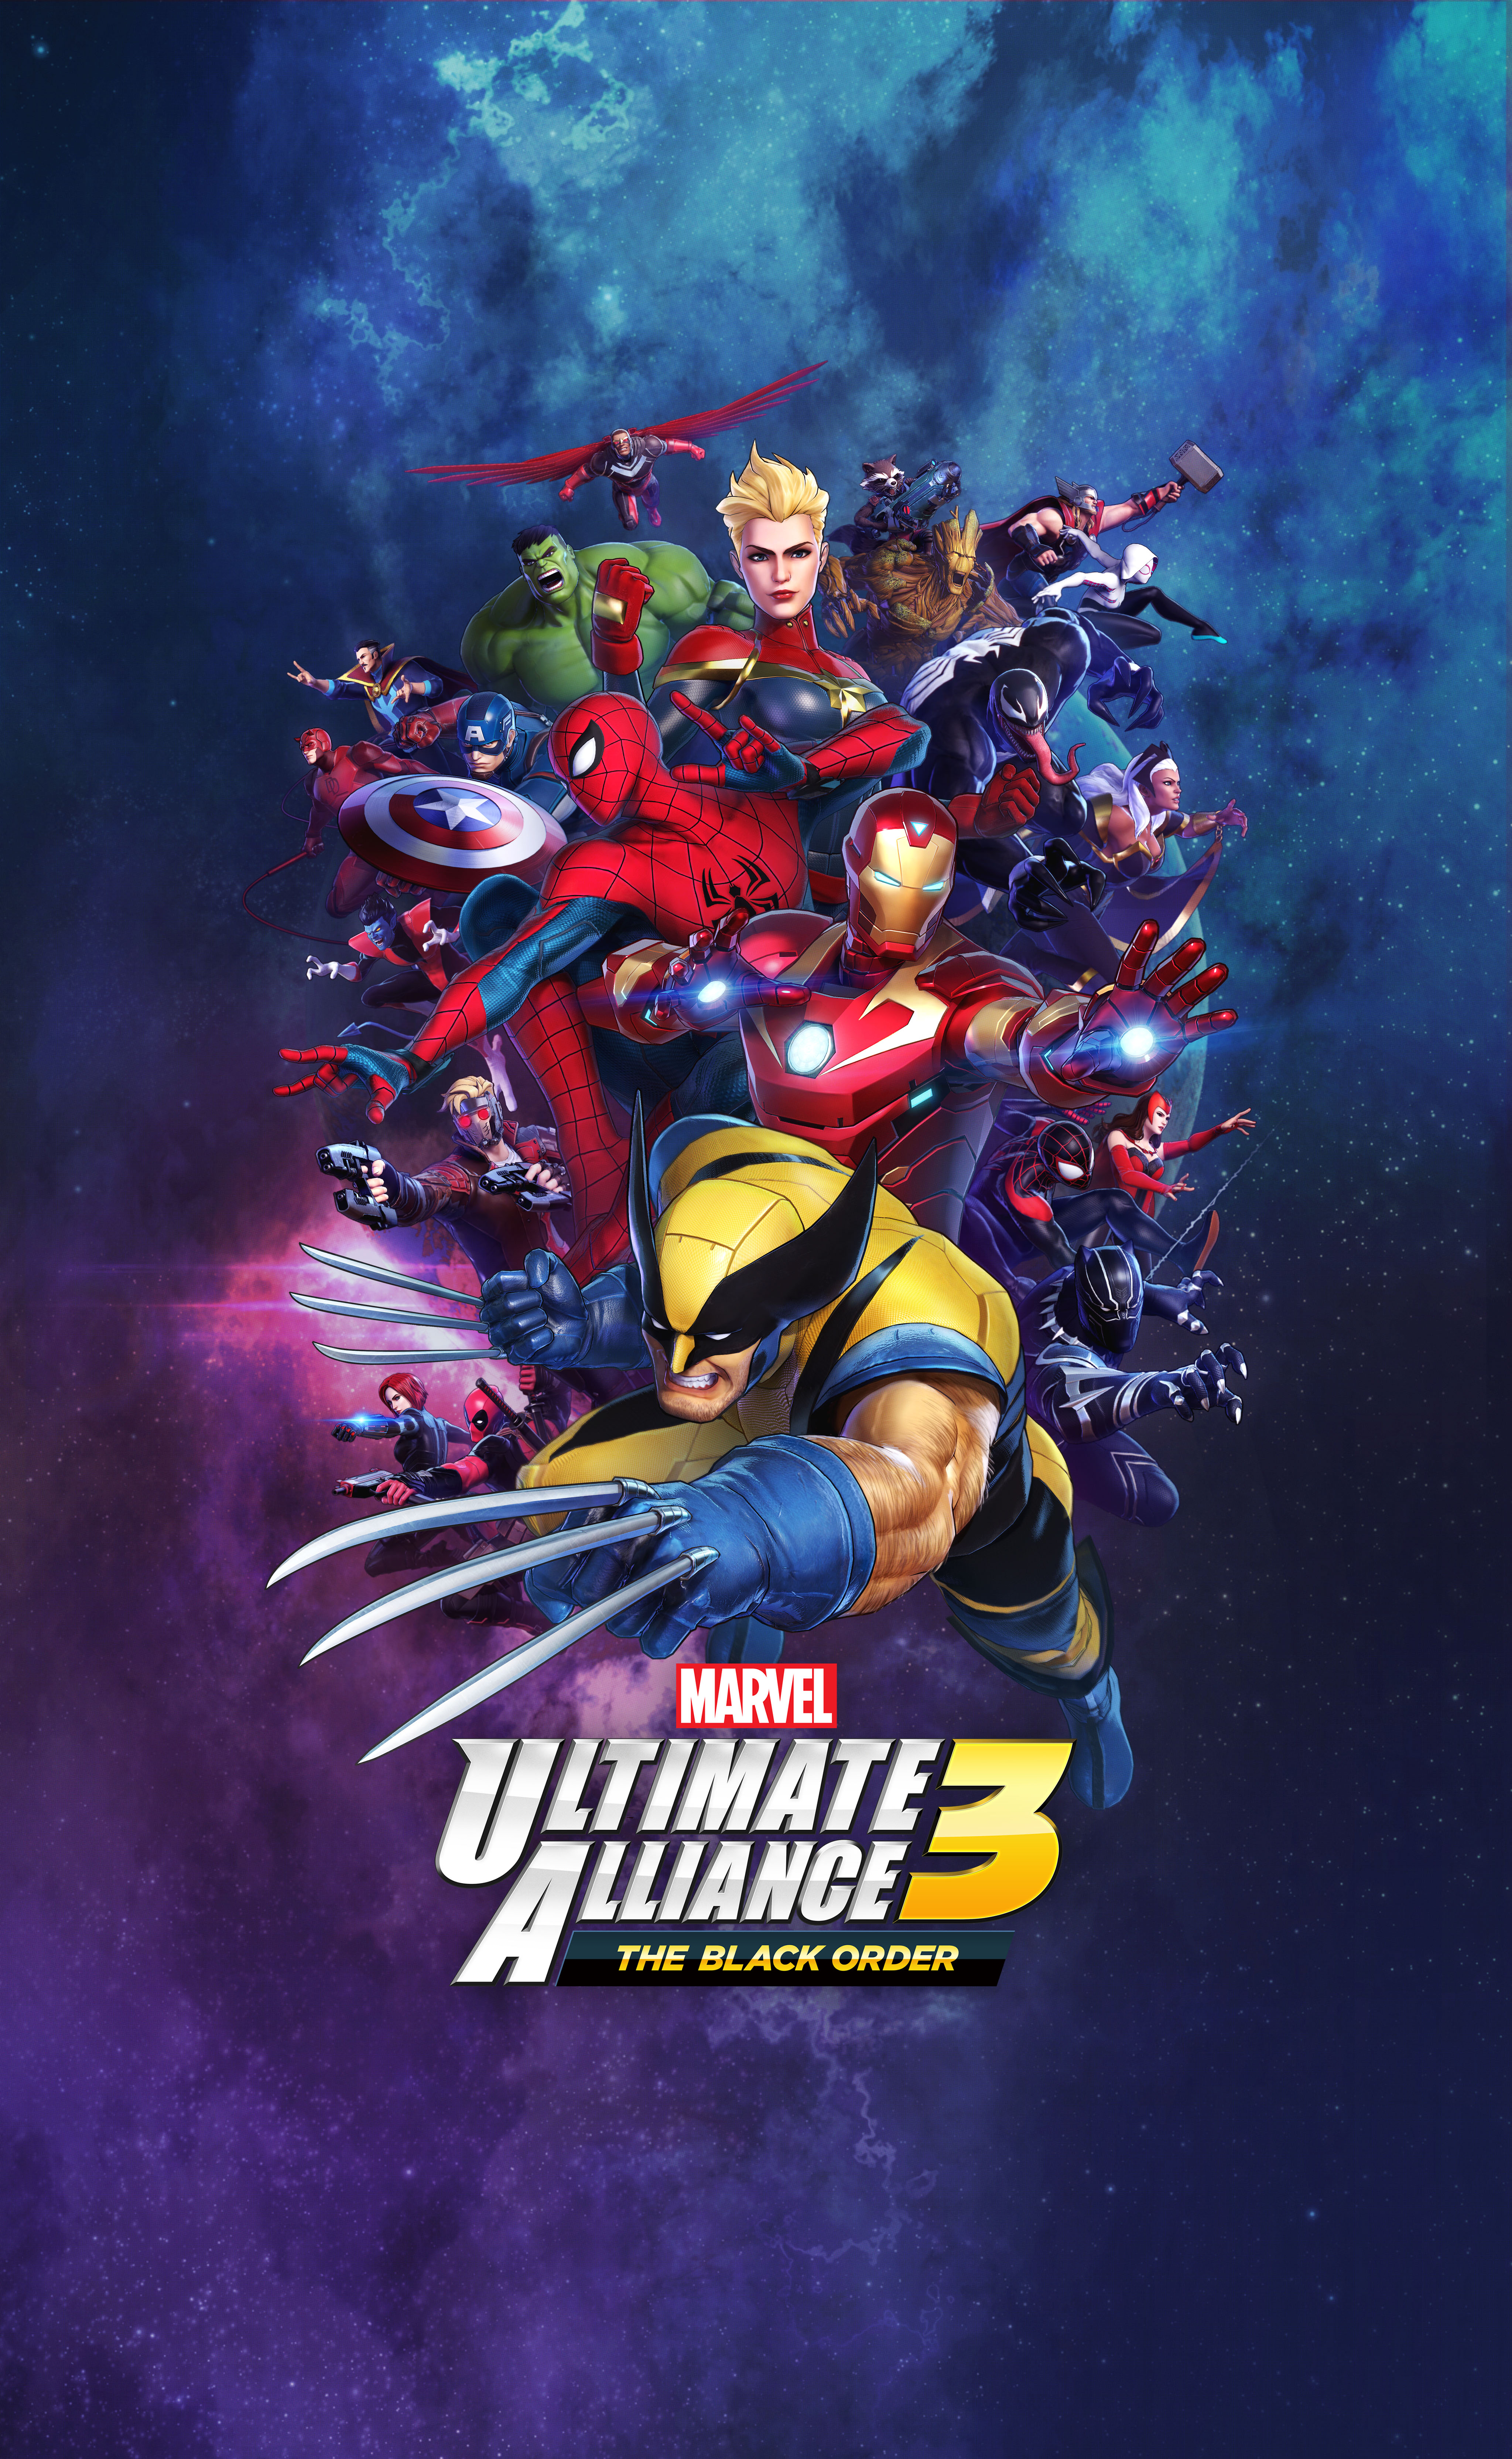 'Marvel Ultimate Alliance 3' Launching On Nintendo Switch This Summer